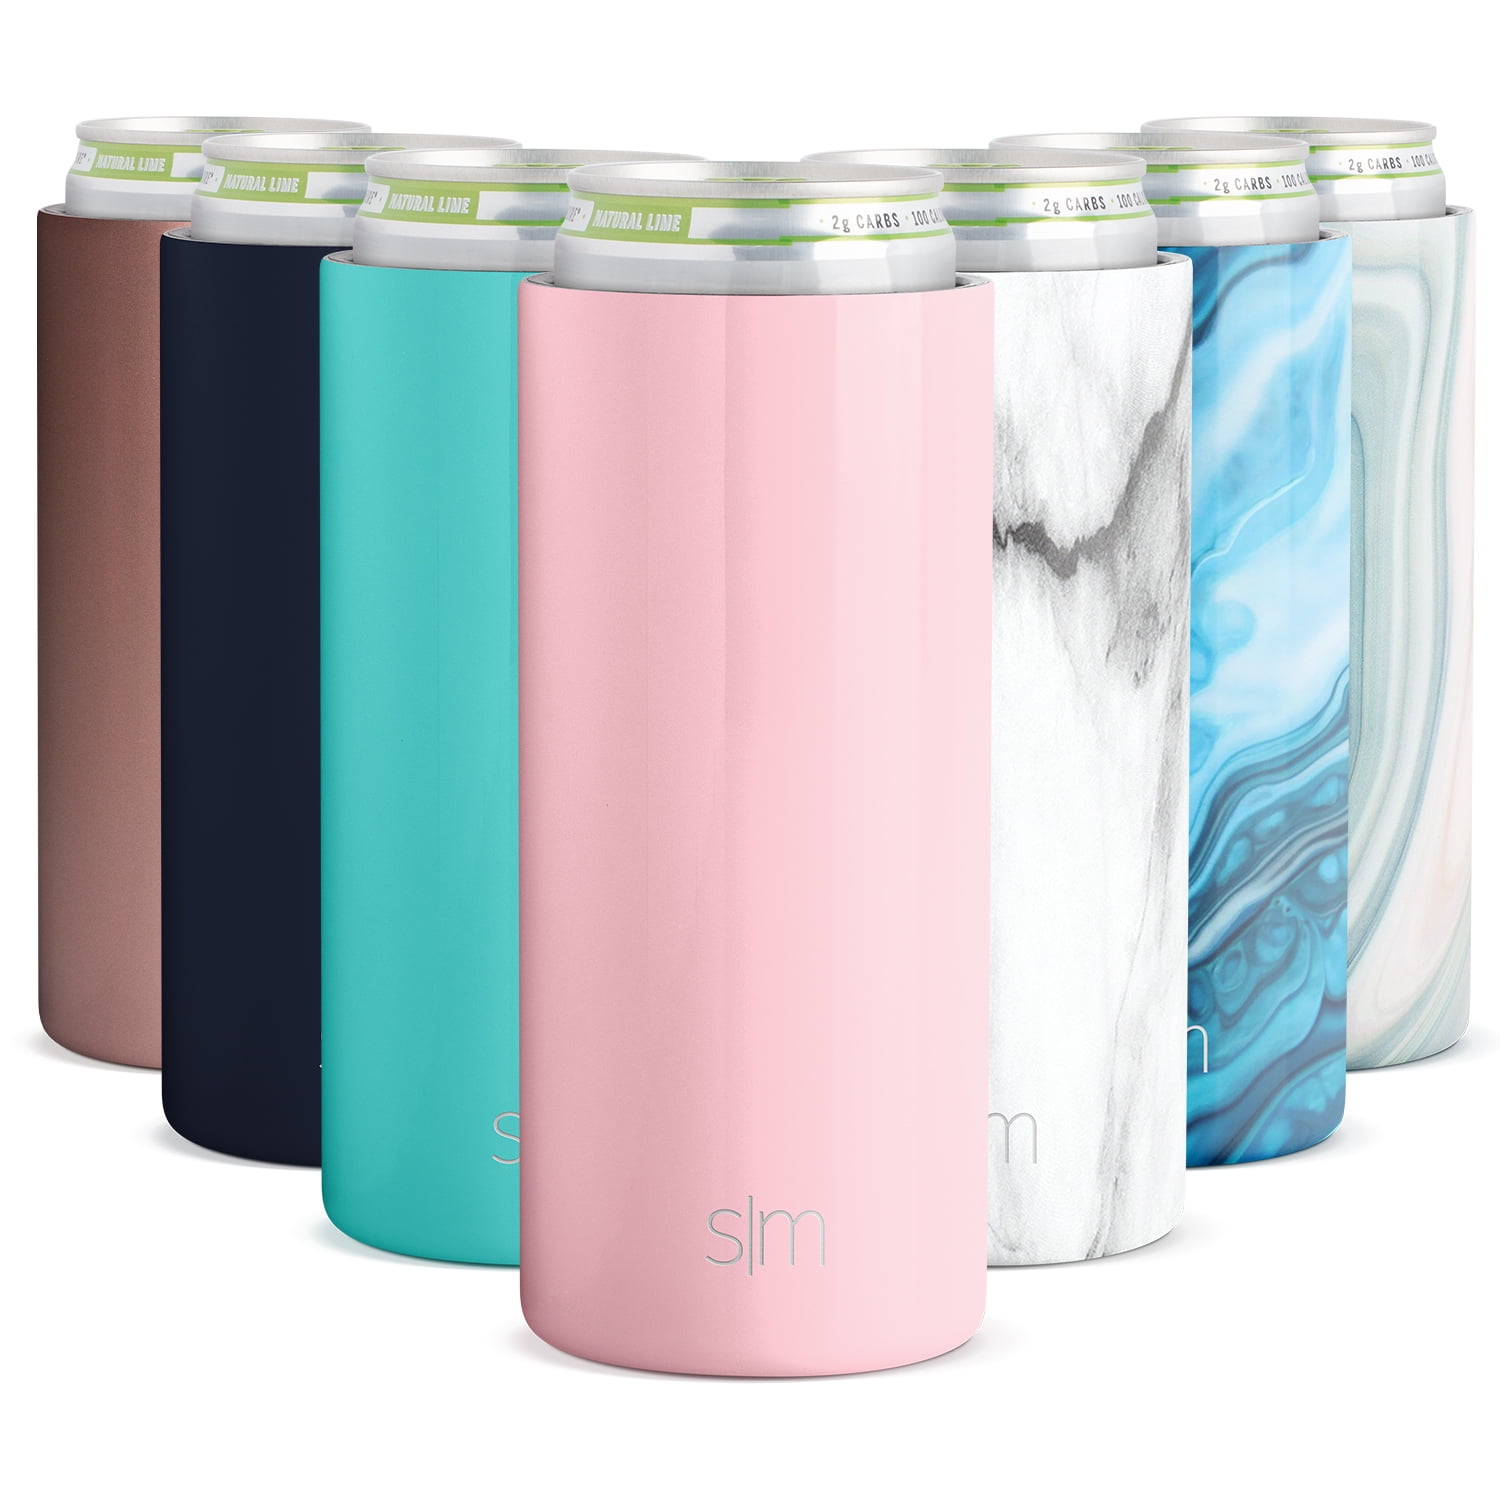 TILUCK Skinny Can Cooler for Slim Beer & Hard Seltzer, Stainless Steel,  Doucle-Walled Stainless Steel Insulated Slim Cans, Standard 12 oz  (Pineapple